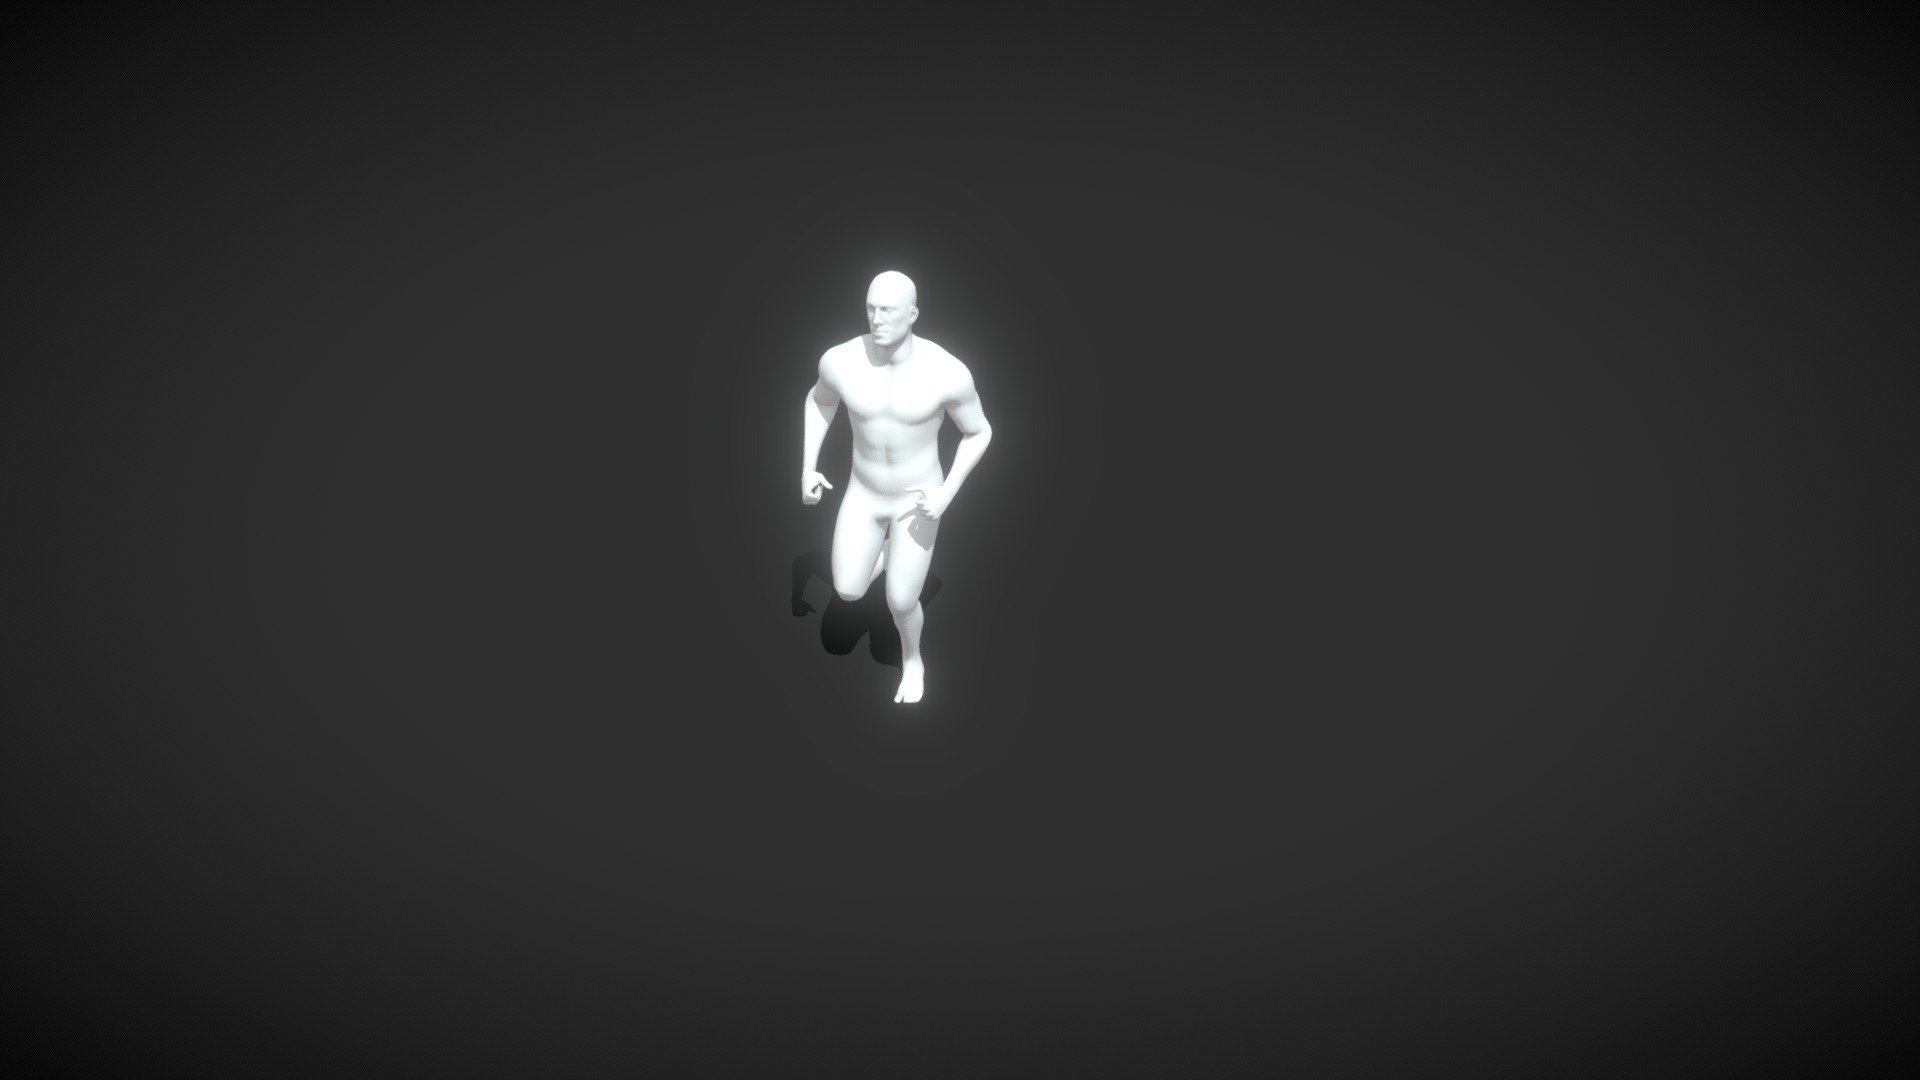 Male Body Base Mesh 28 Animations 3D Model 20k Polygons

Technical details:




File formats included in the package are: FBX, OBJ, GLB, PLY, STL, ABC, DAE, BLEND, gLTF (generated), USDZ (generated)

Native software file format: BLEND

Polygons: 20,012

Vertices: 20,152

The model contains UV Map.

The model is rigged and animated.

28 animations are included.

Following formats contain rig and animation: BLEND, FBX, GLTF/GLB.

Following animations are included:




( standard - 5 animations): idle, sit down &amp; get up, eat, drink, write

( move - 2 animations): walk, run

( exercise - 6 animations): squat, pushup, sit up, crunch, bench press, bicycle riding

( swim - 4 animations): crawl, breaststroke, butterfly, backstroke

( kickboxing - 8 animations): jab punch, cross punch, lead hook, rear hook, lead uppercut, lead bodyshot, rear uppercut, rear bodyshot

( karate - 3 animations): front kick, sidekick, jumping kick
 - Male Body Base Mesh 28 Animations 20k Poly - Buy Royalty Free 3D model by 3DDisco 3d model